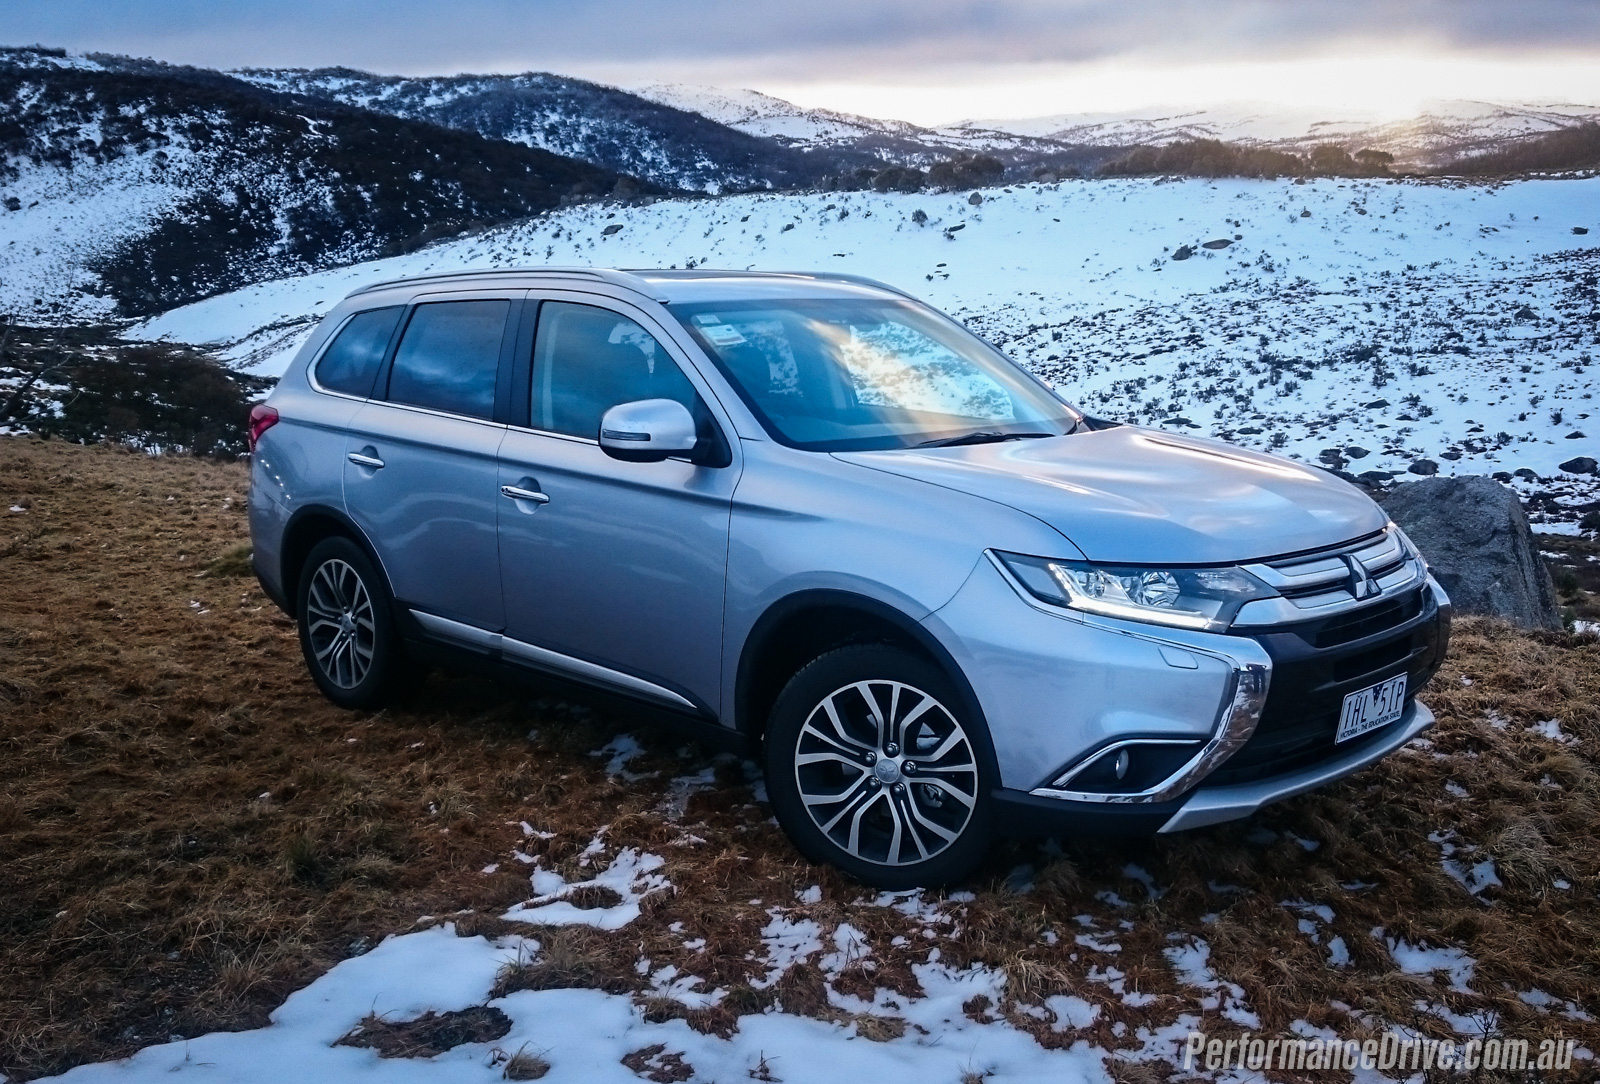 10 things to know about the 2016 Mitsubishi Outlander